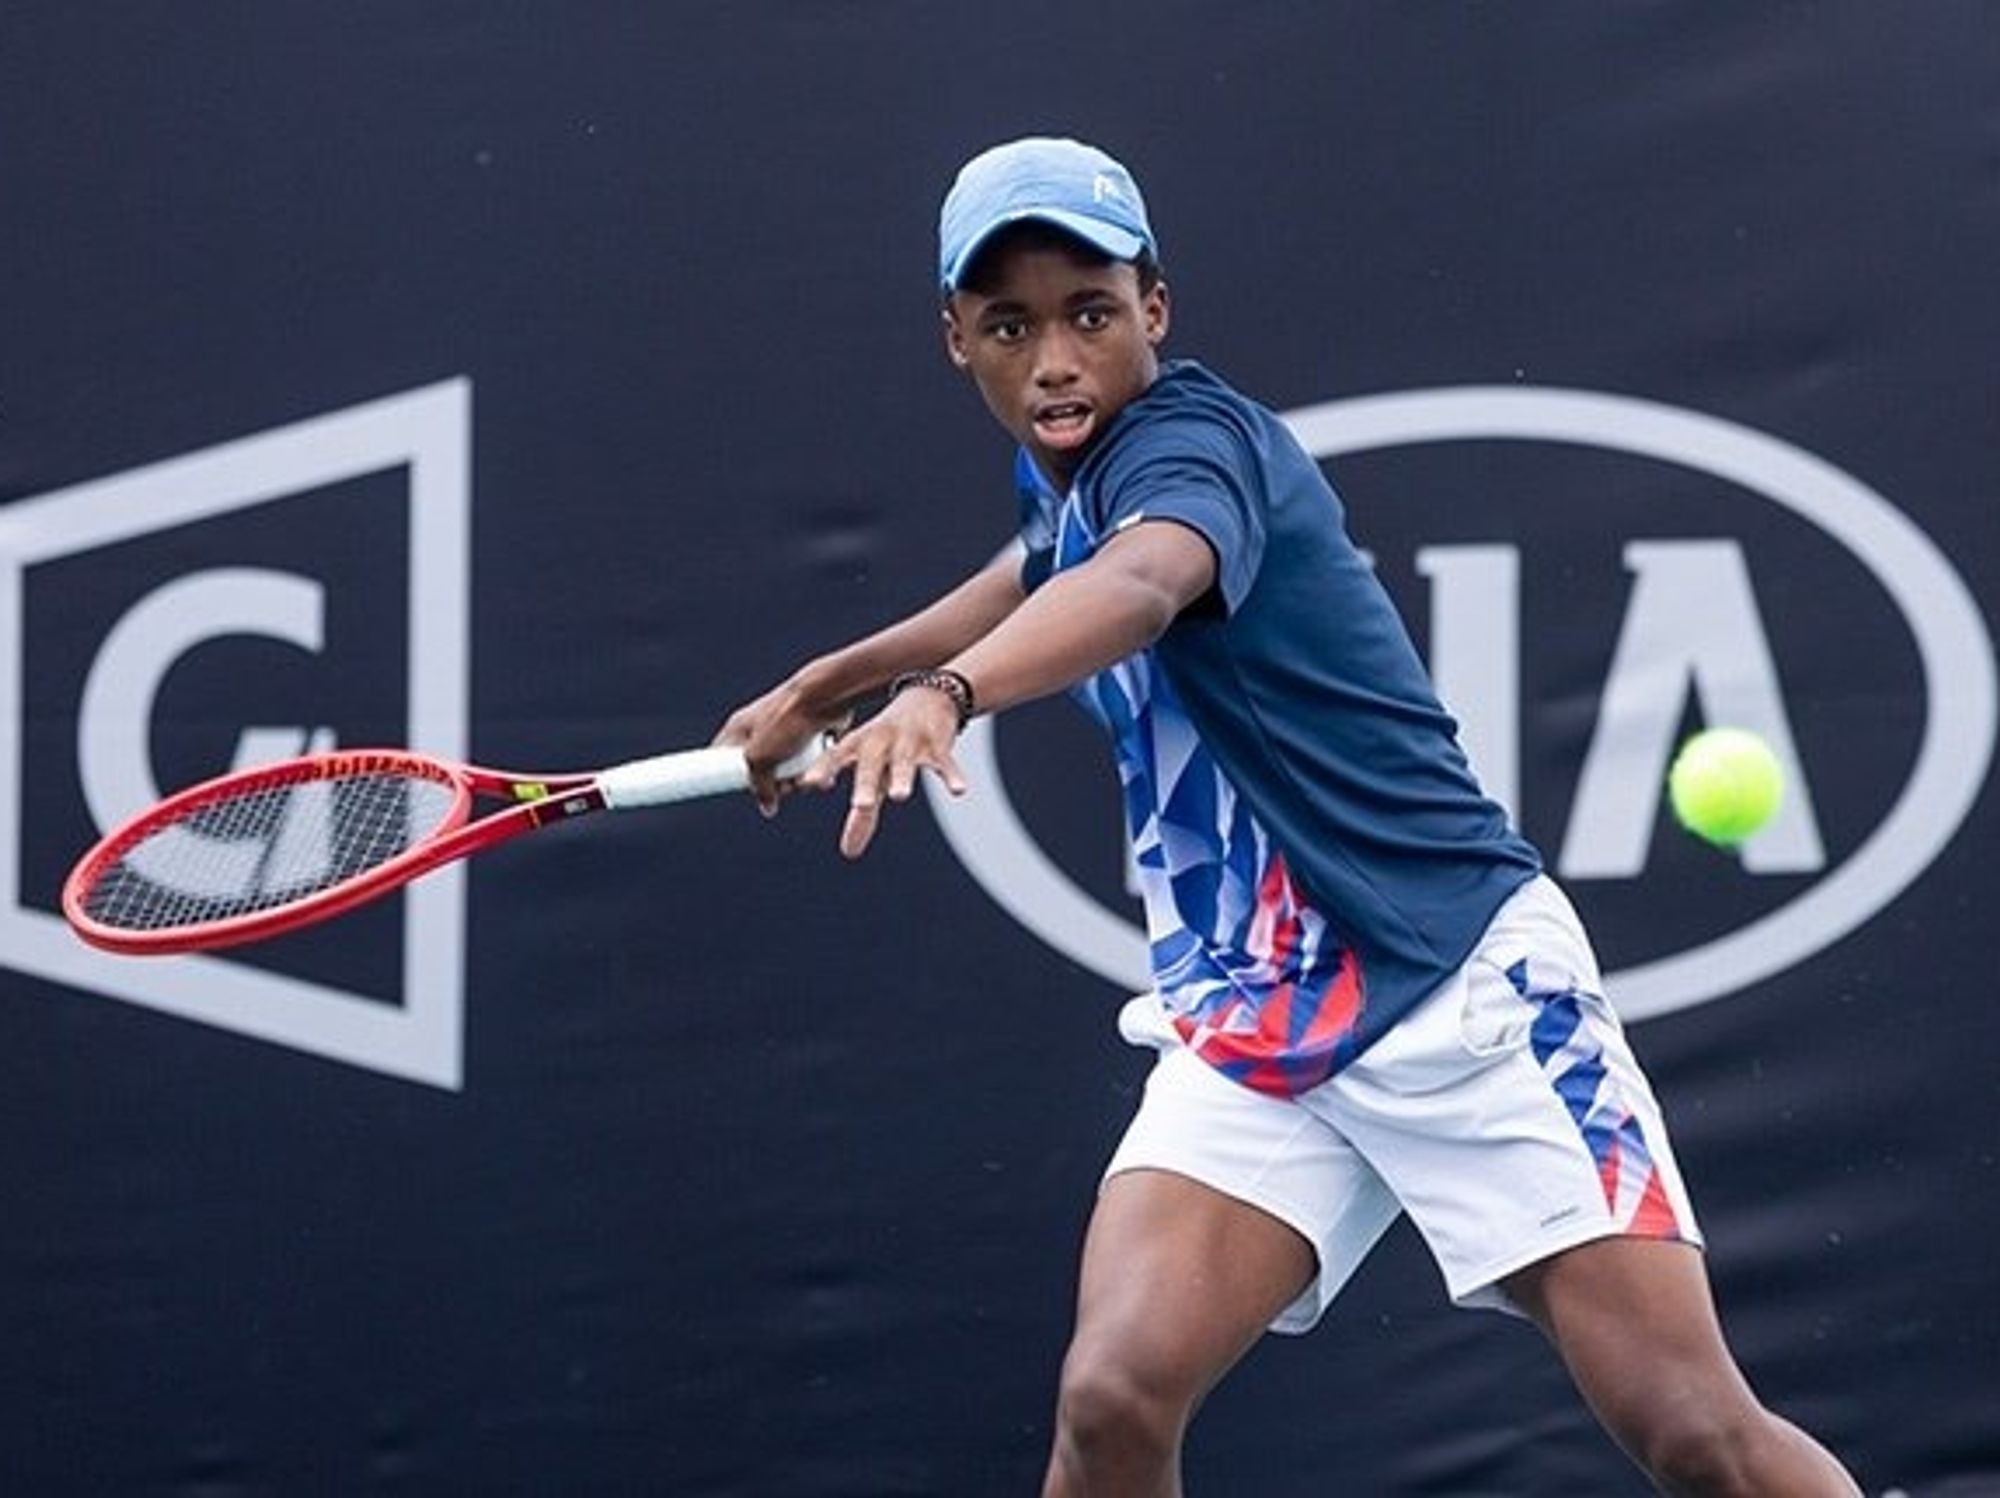 Young black man playing tennis wearing white shorts and blue top.